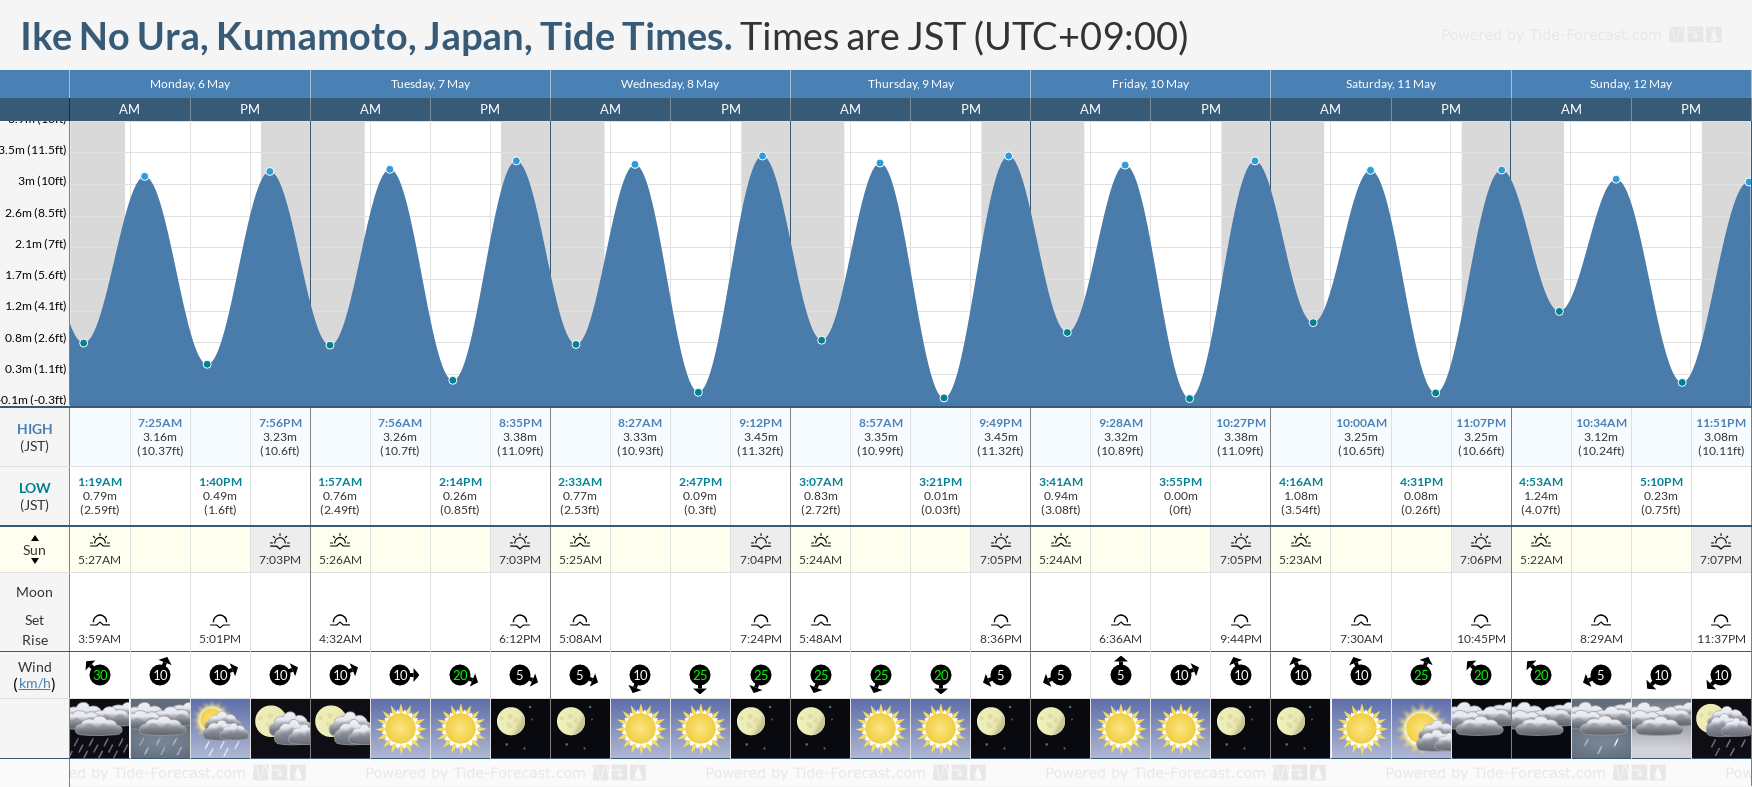 Ike No Ura, Kumamoto, Japan Tide Chart including high and low tide tide times for the next 7 days